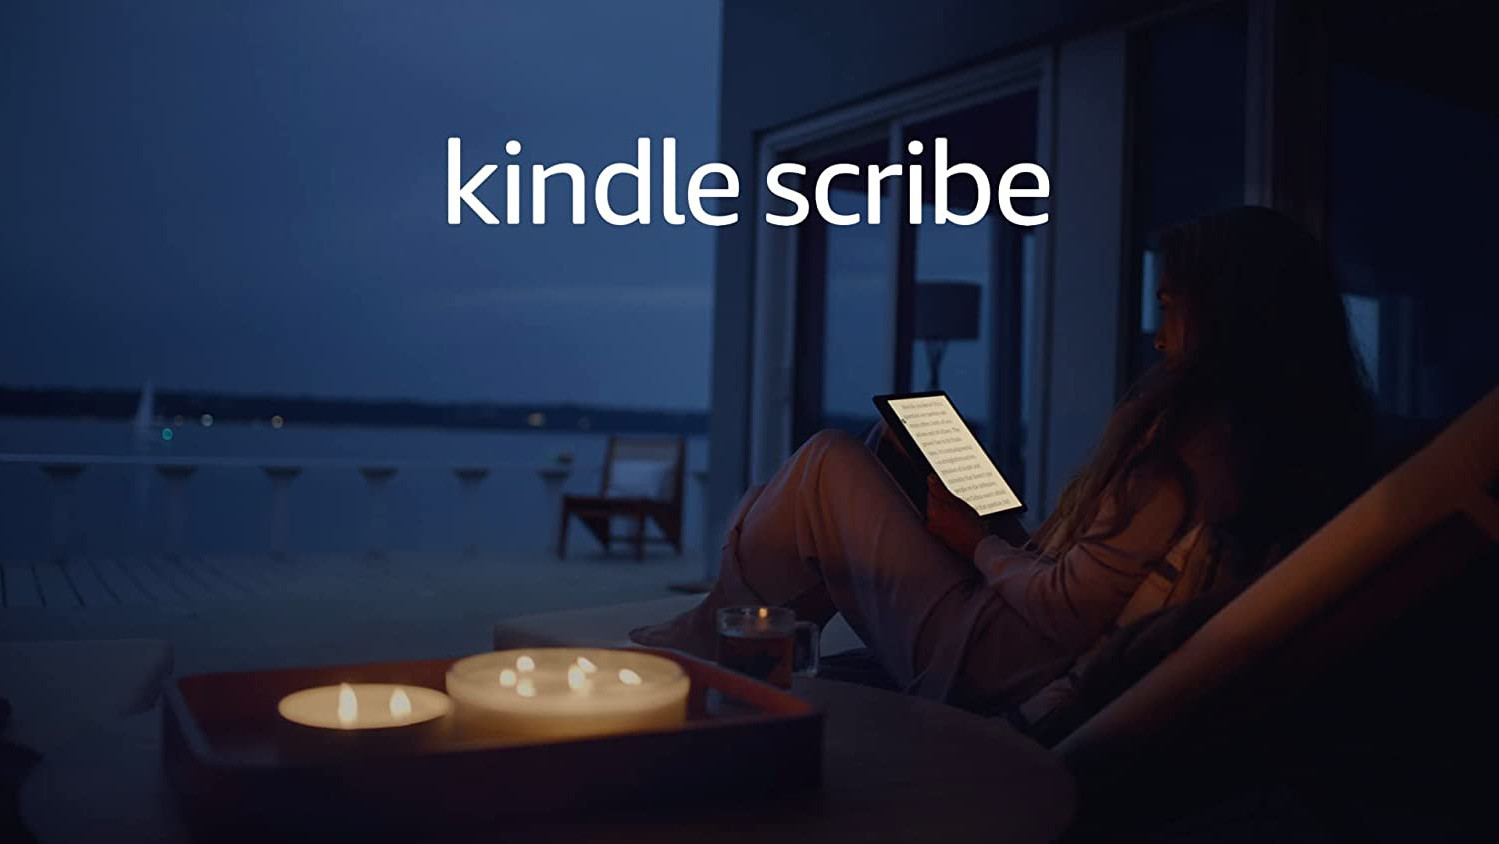 How good is the Kindle Scribe at note taking? | annotated by Daniel